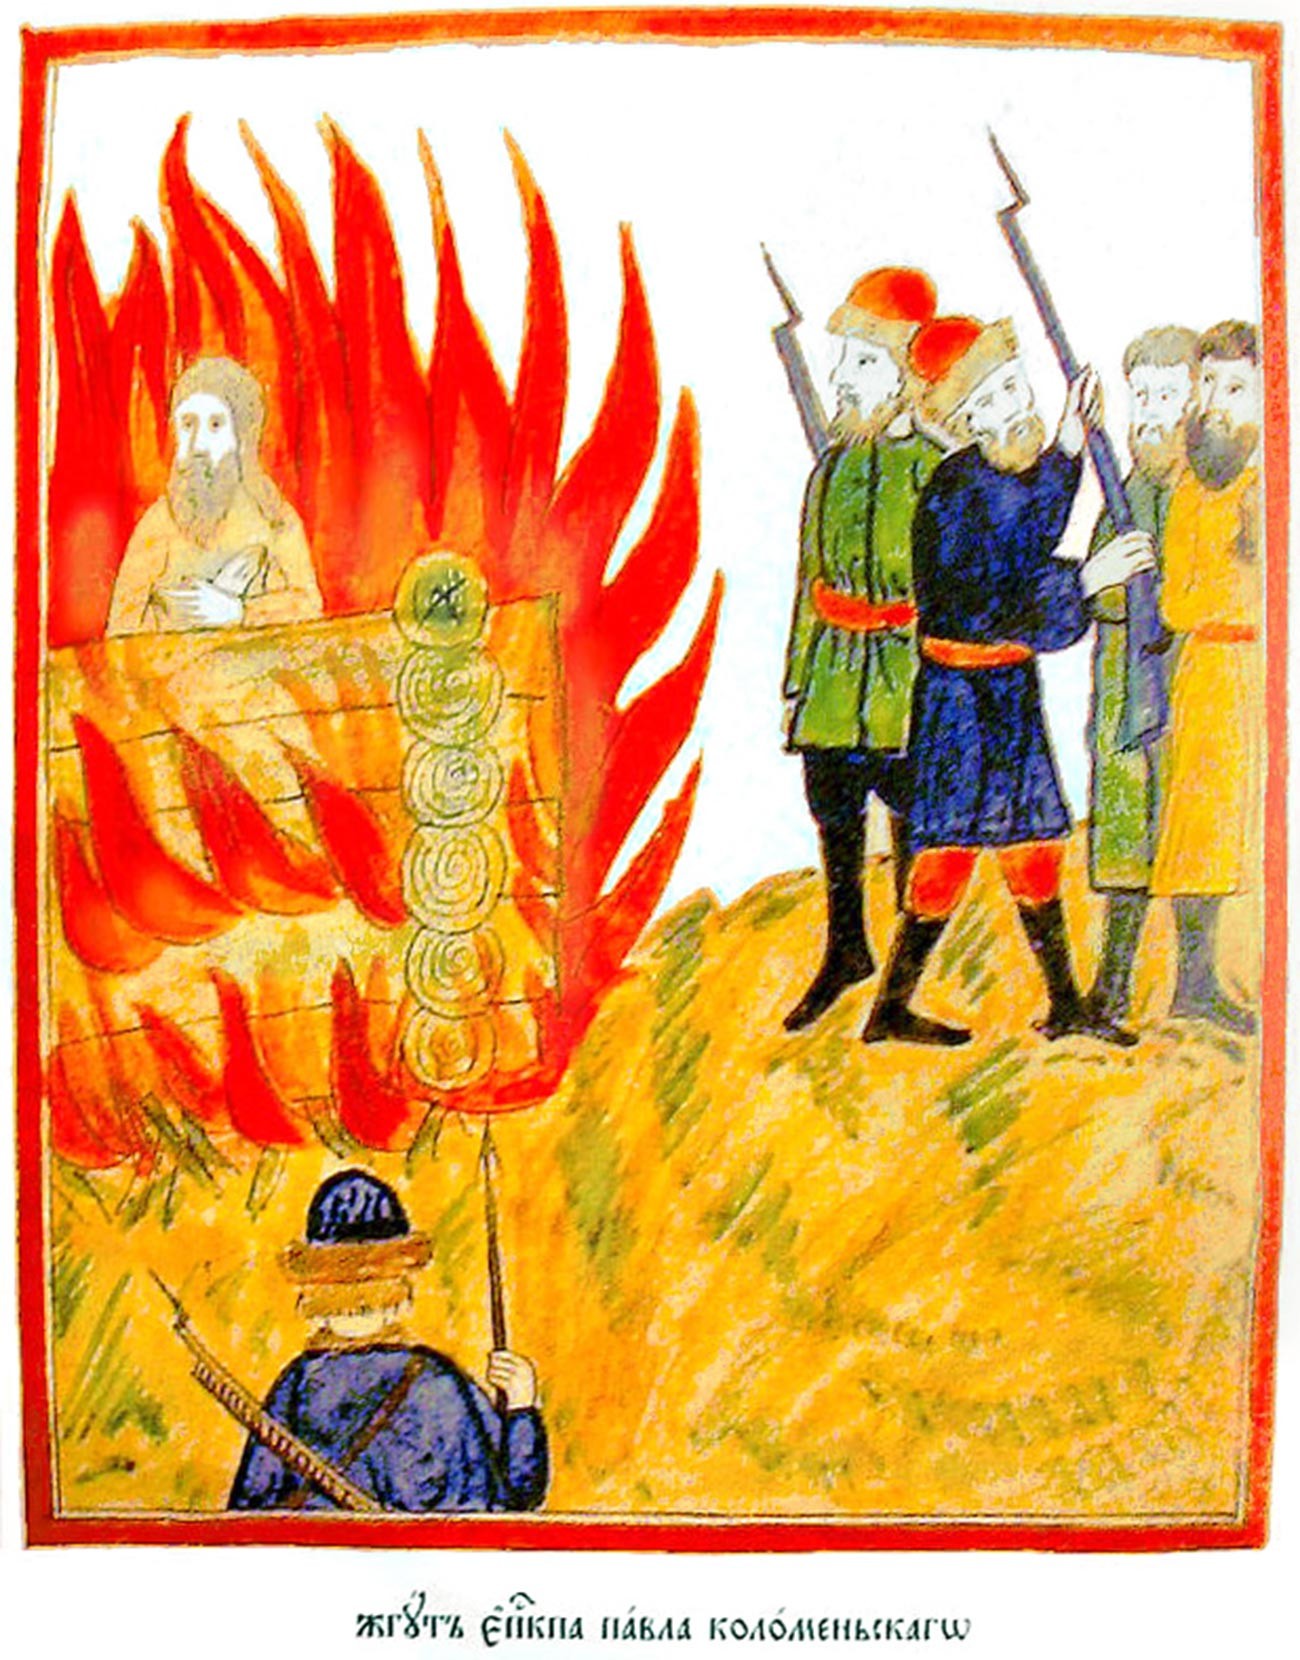 'Bishop Paul of Kolomna being burned,' a 19th-century Old Ritualists' picture. Paul of Kolomna (Павел Коломенский) was a 17th-century Russian prelate and martyr in the view of the Old Believers. 